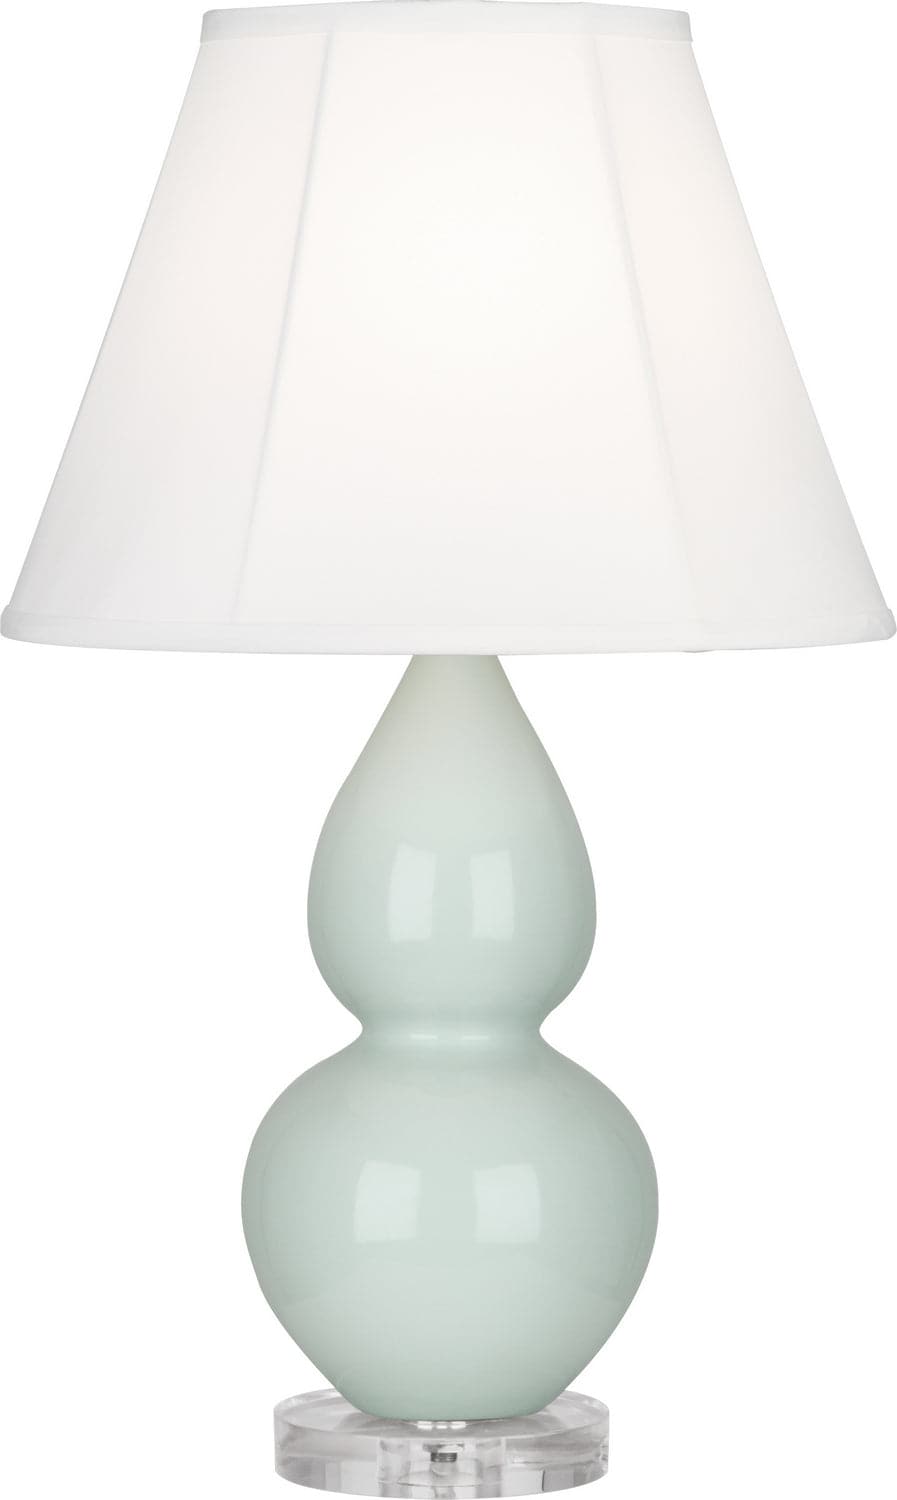 Robert Abbey - A788 - One Light Accent Lamp - Small Double Gourd - Celadon Glazed w/Lucite Base